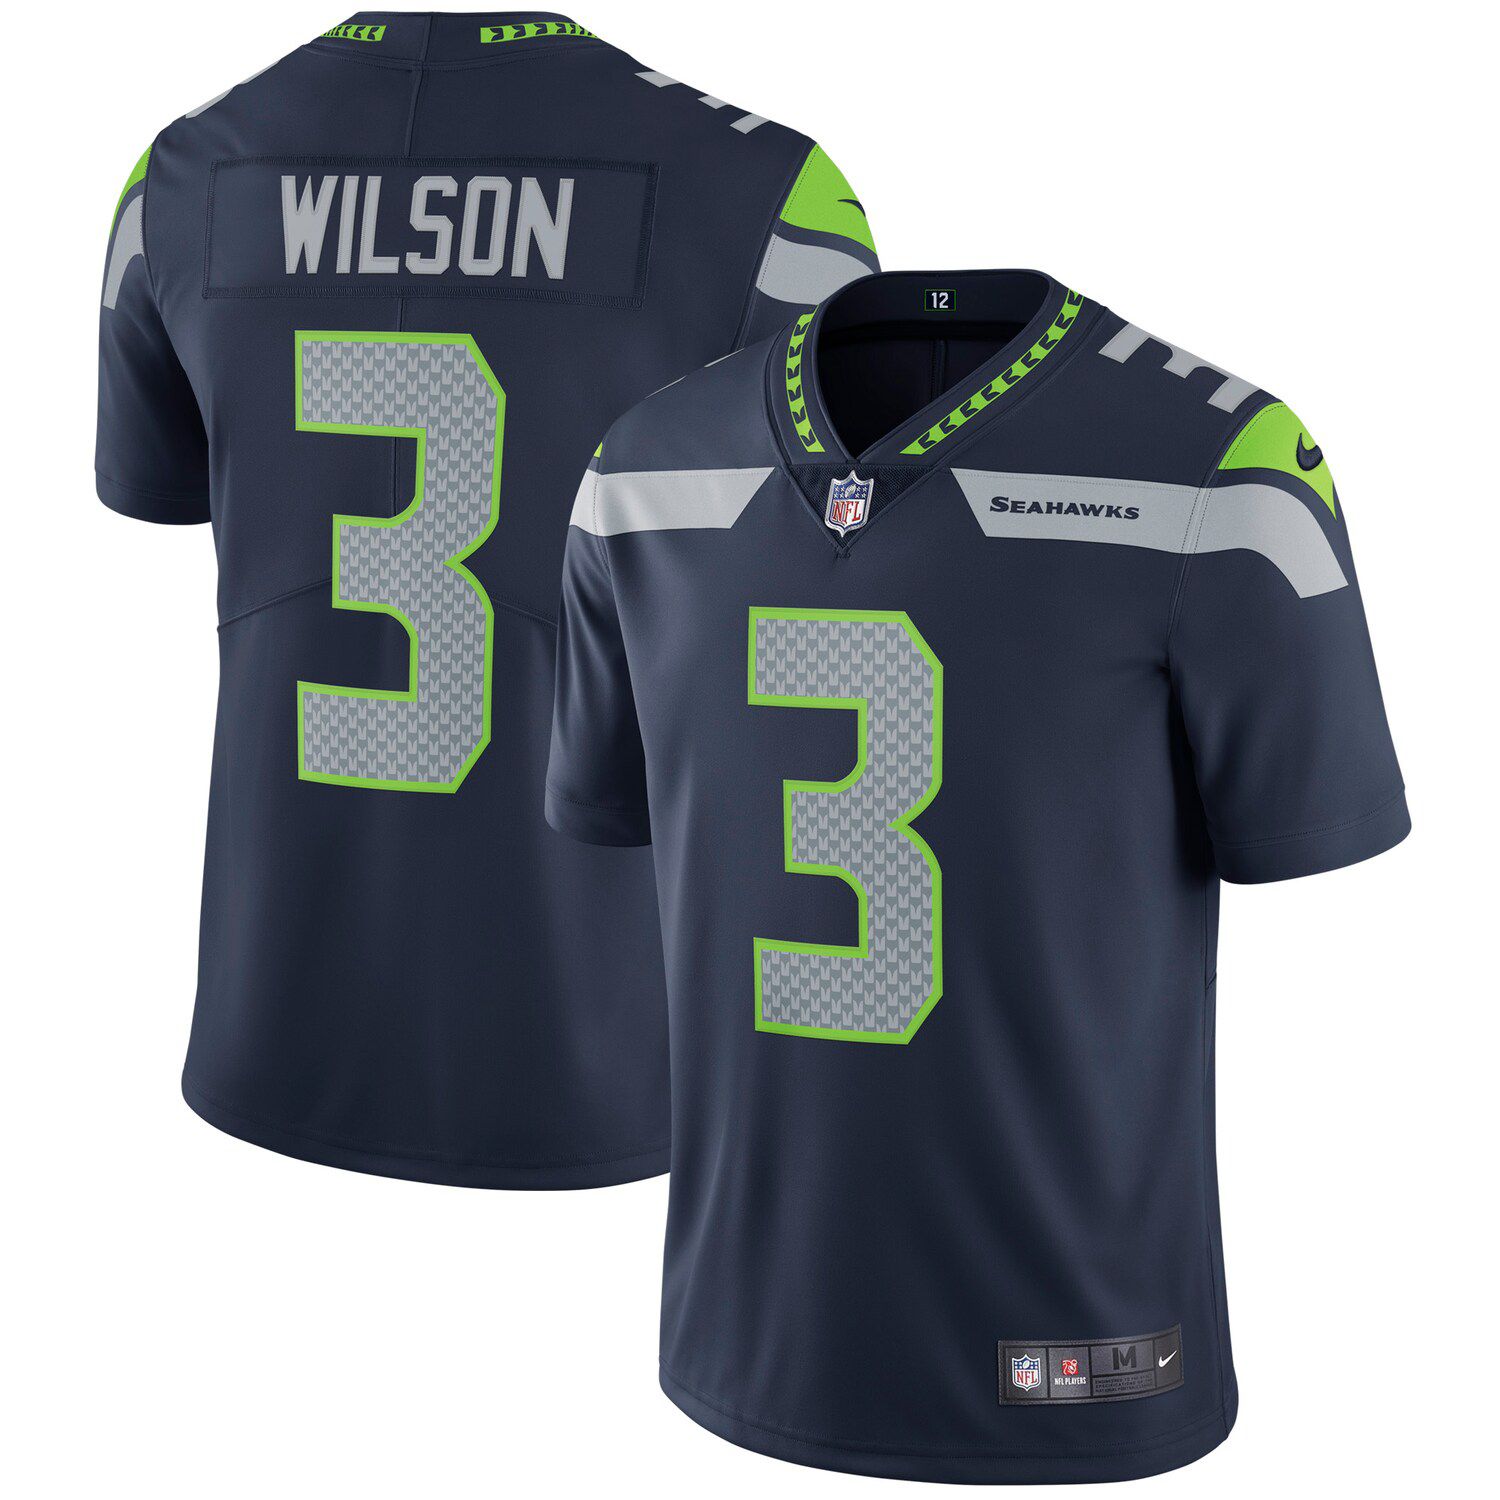 russell wilson college jersey